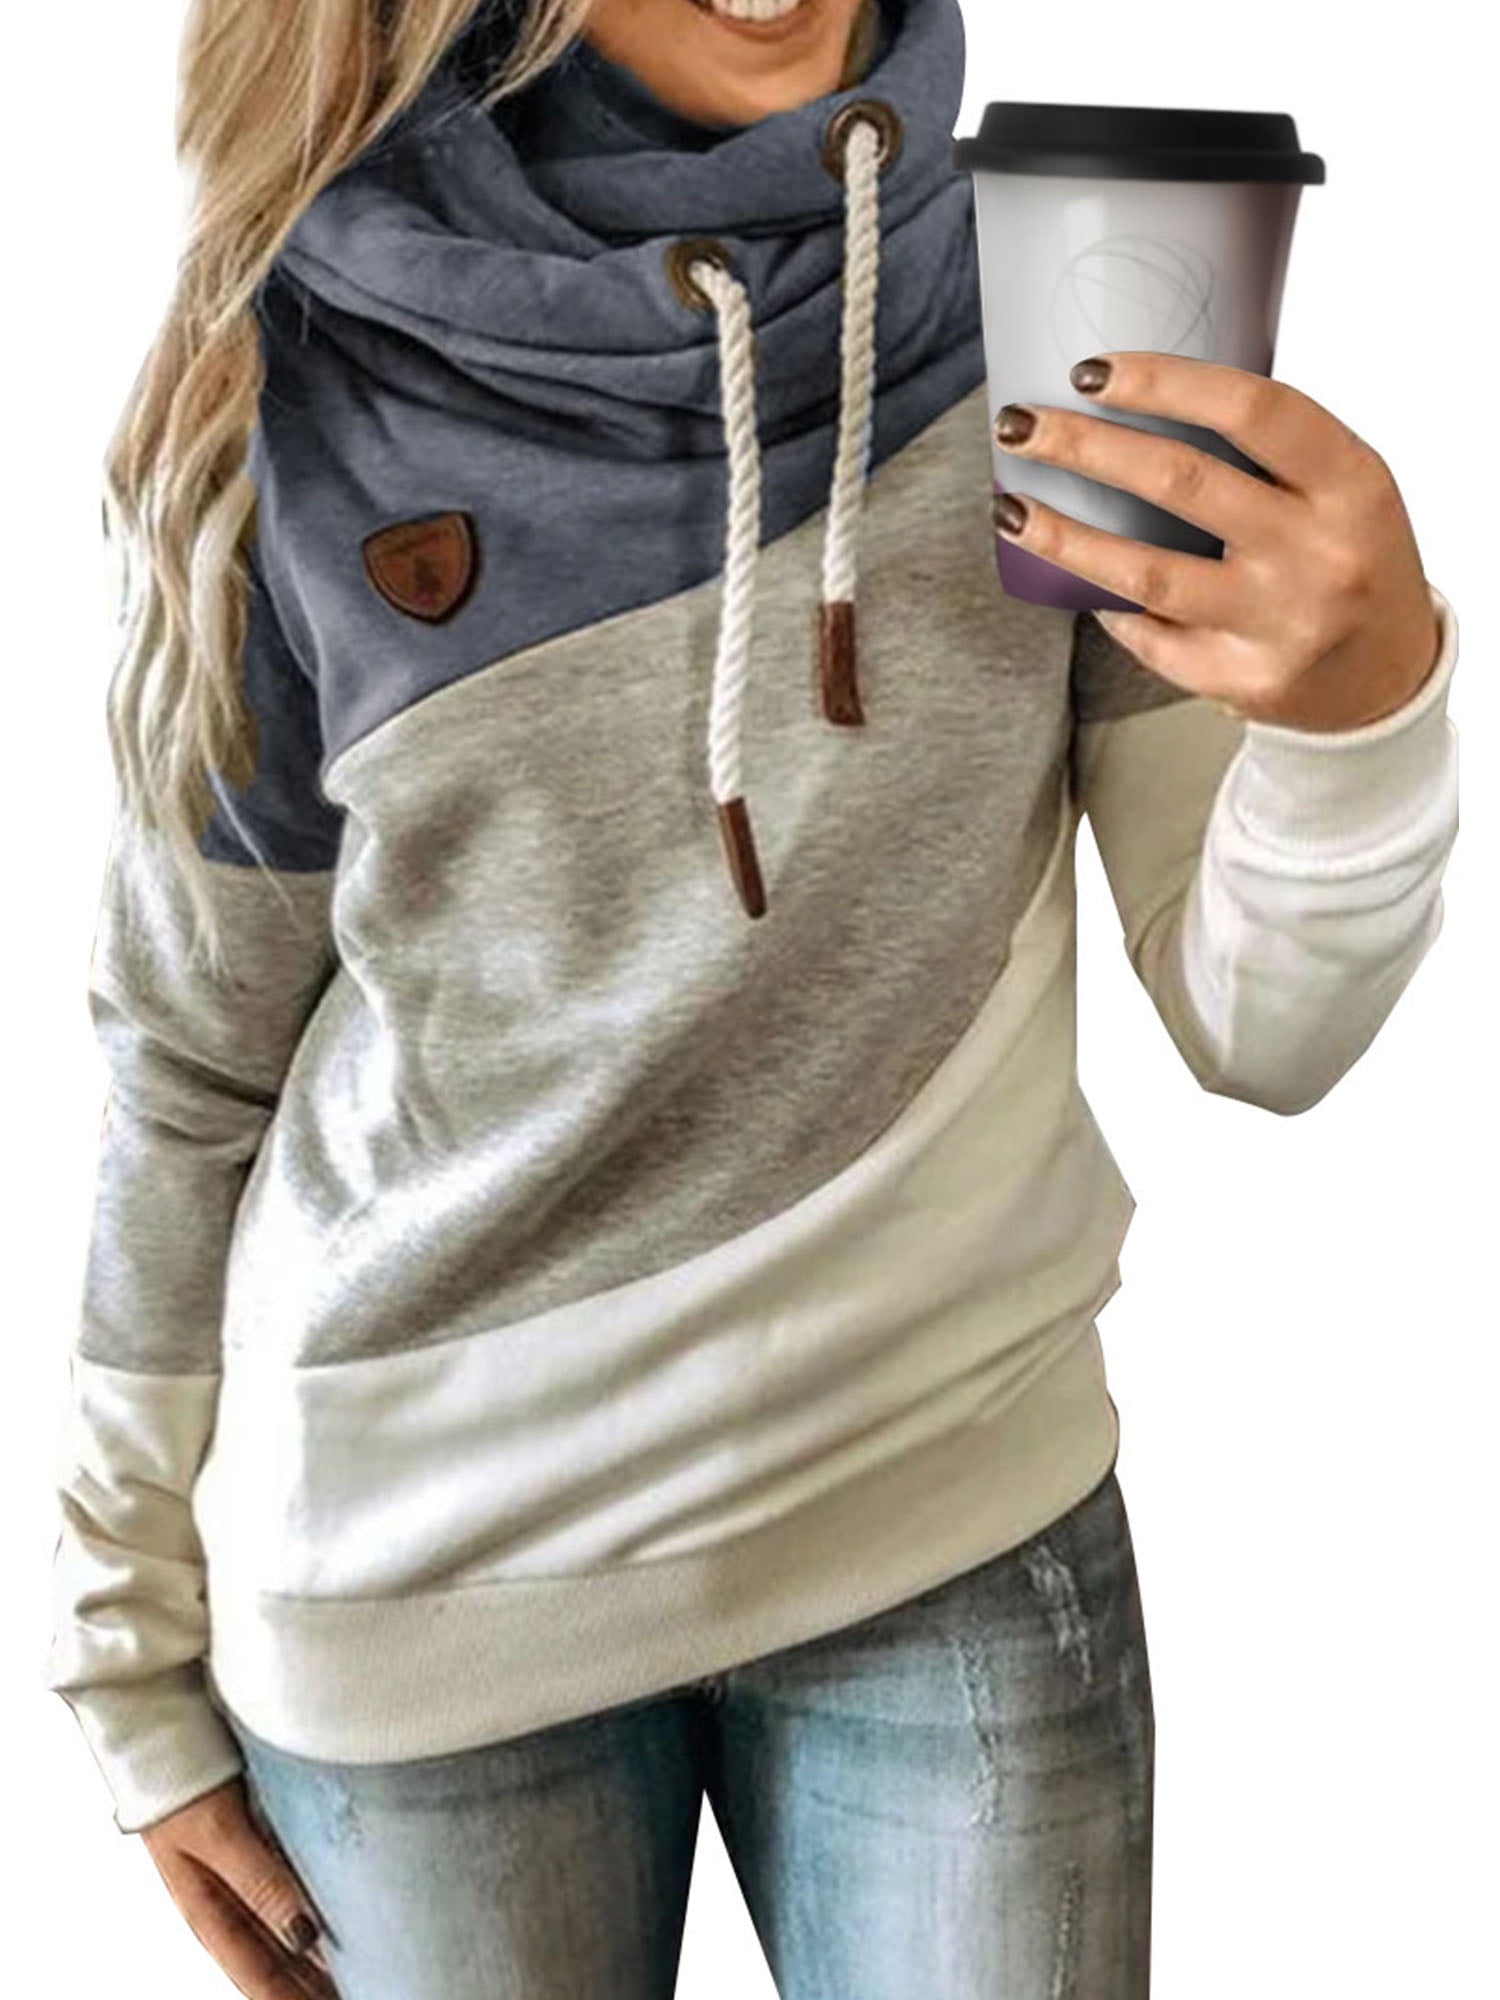 Sweatshirts for Women Hoodie Pullover,Cowl Neck Tops with Pockets 